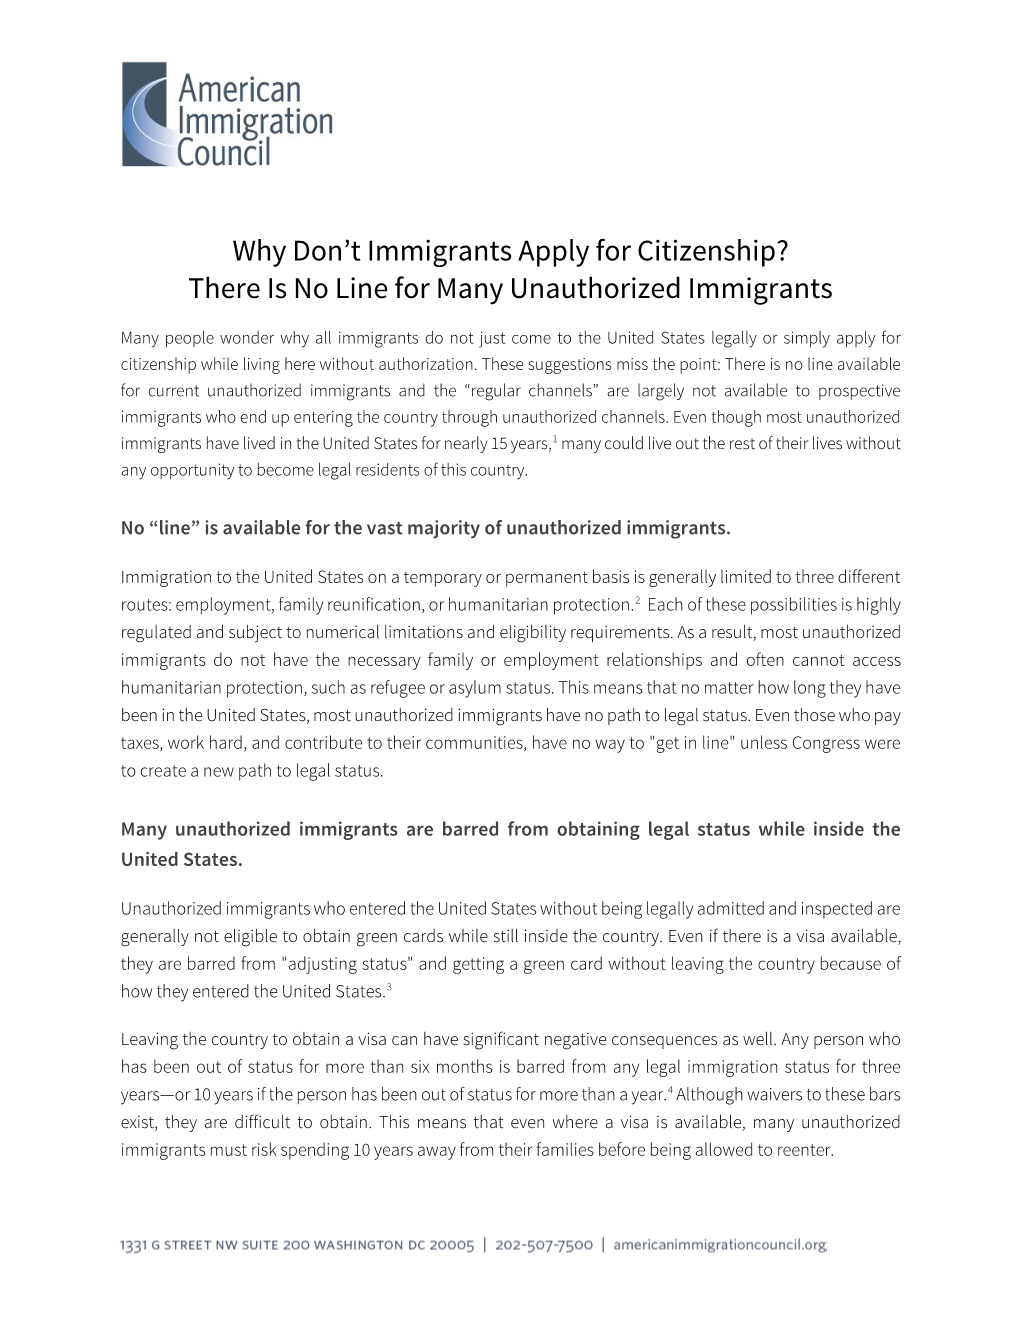 Why Don't Immigrants Apply for Citizenship? There Is No Line for Many Unauthorized Immigrants